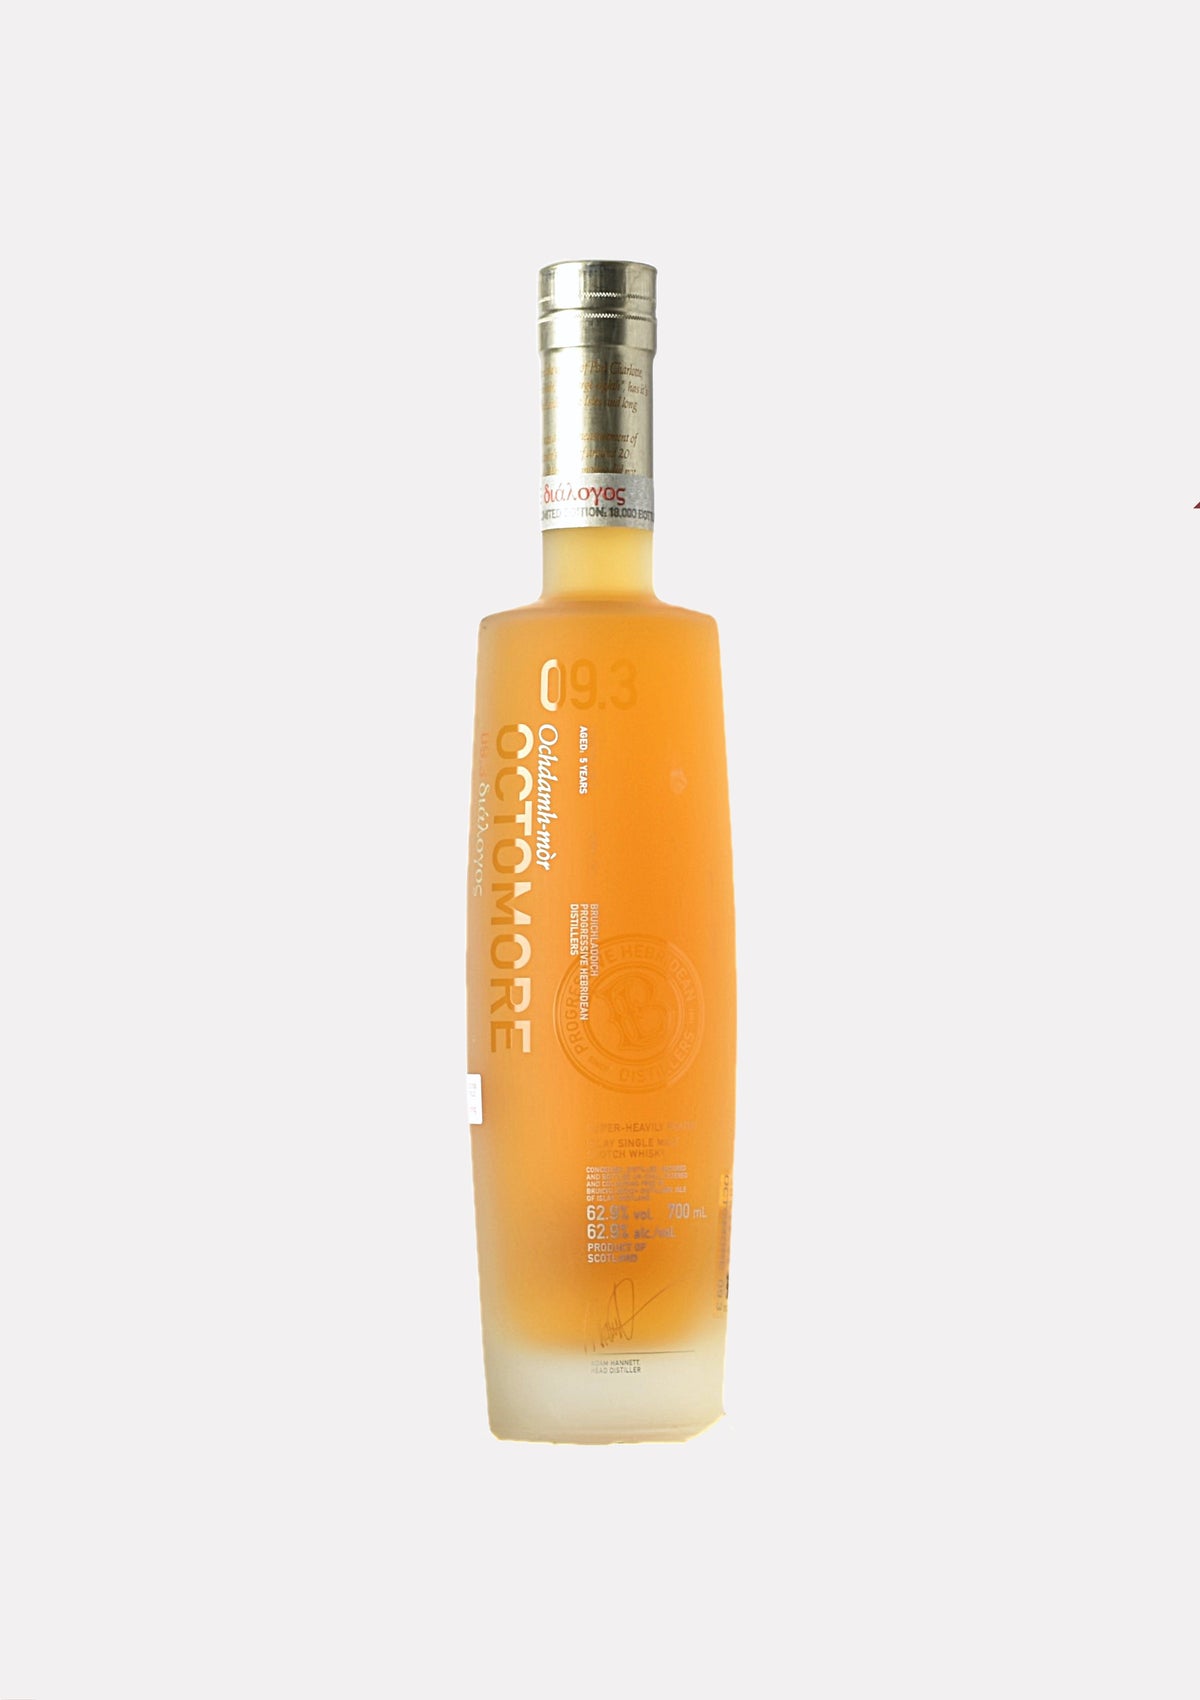 Octomore 2012- 2018 09.3 133 ppm